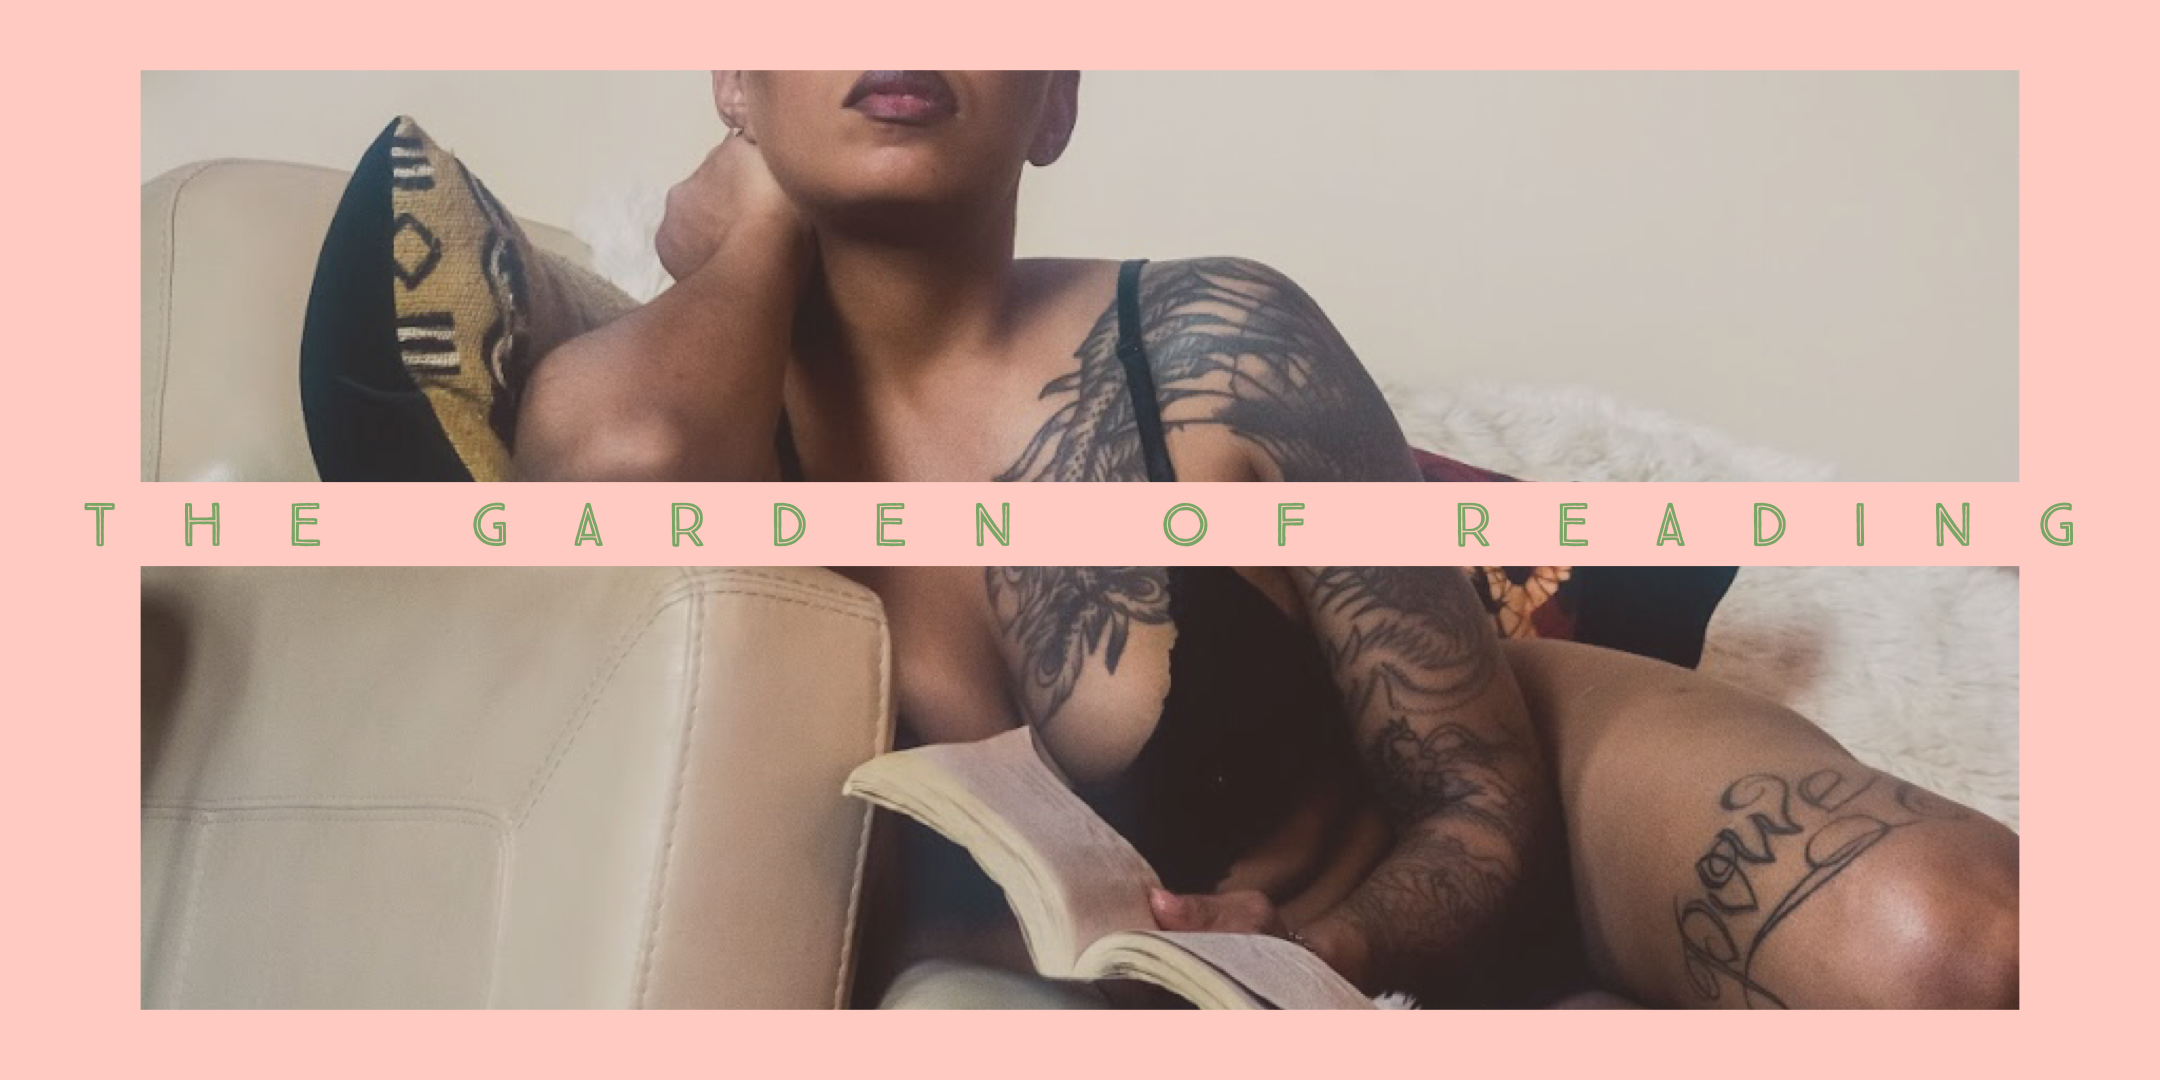 THE NAKED HUSTLE SHOW PRESENTS: THE GARDEN OF READING